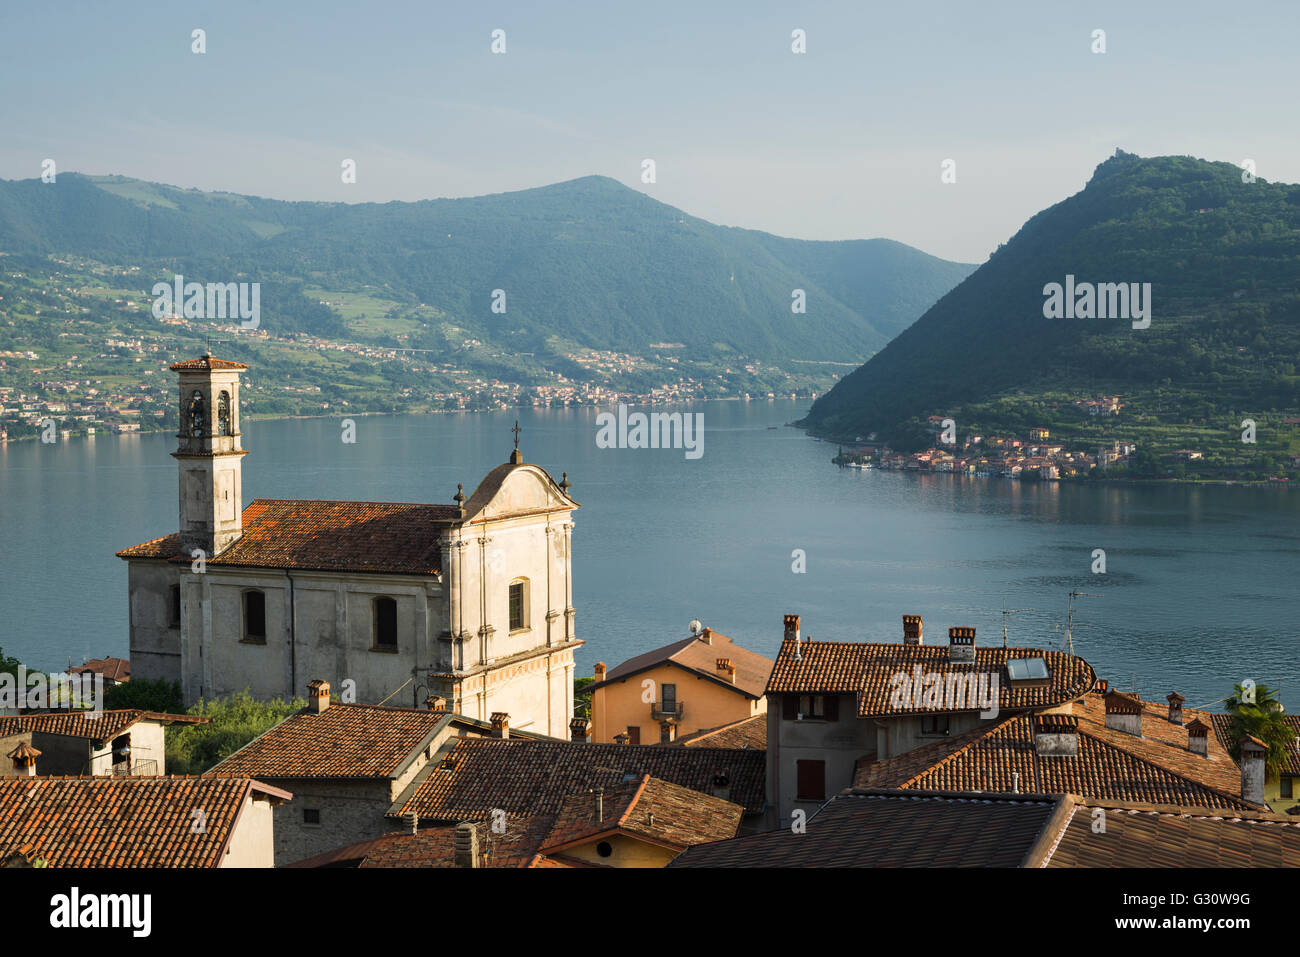 Church of San Rocco in Marone village with panorama of Lake Iseo and Monte Isola island in the evening light, Lombardy, Italy Stock Photo